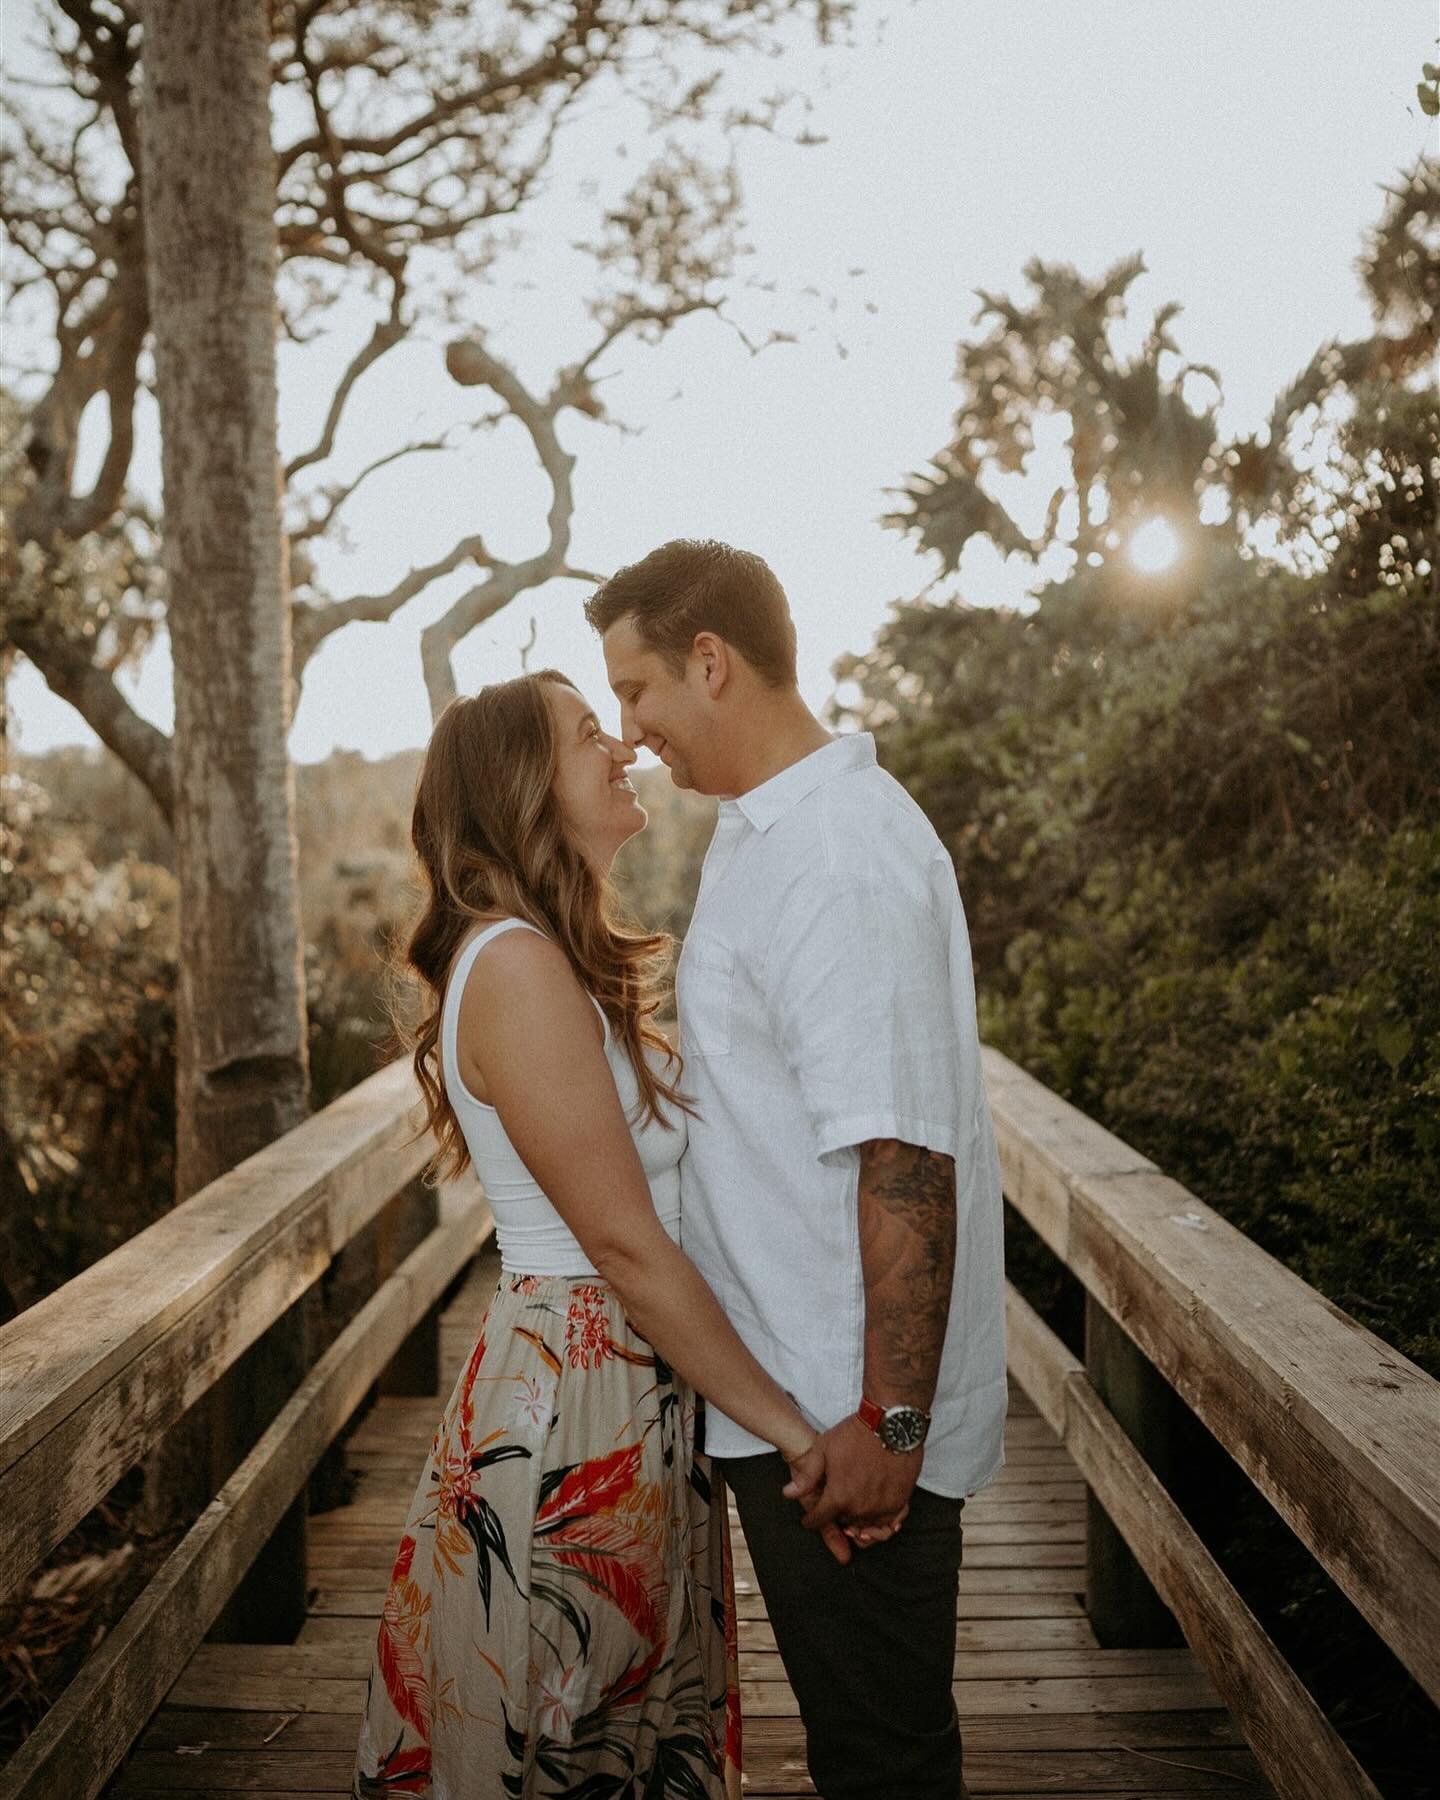 can't wait to see these two say I do today ✨
.
.
.
.

#sunsetphotography #sunsetengagementsession #goldenhourphotography #goldenhour #goldenhourjax #jaxphotographer #jaxweddingphotographer #jaxweddings #jacksonvillewedding #jacksonvilleweddingphotogr